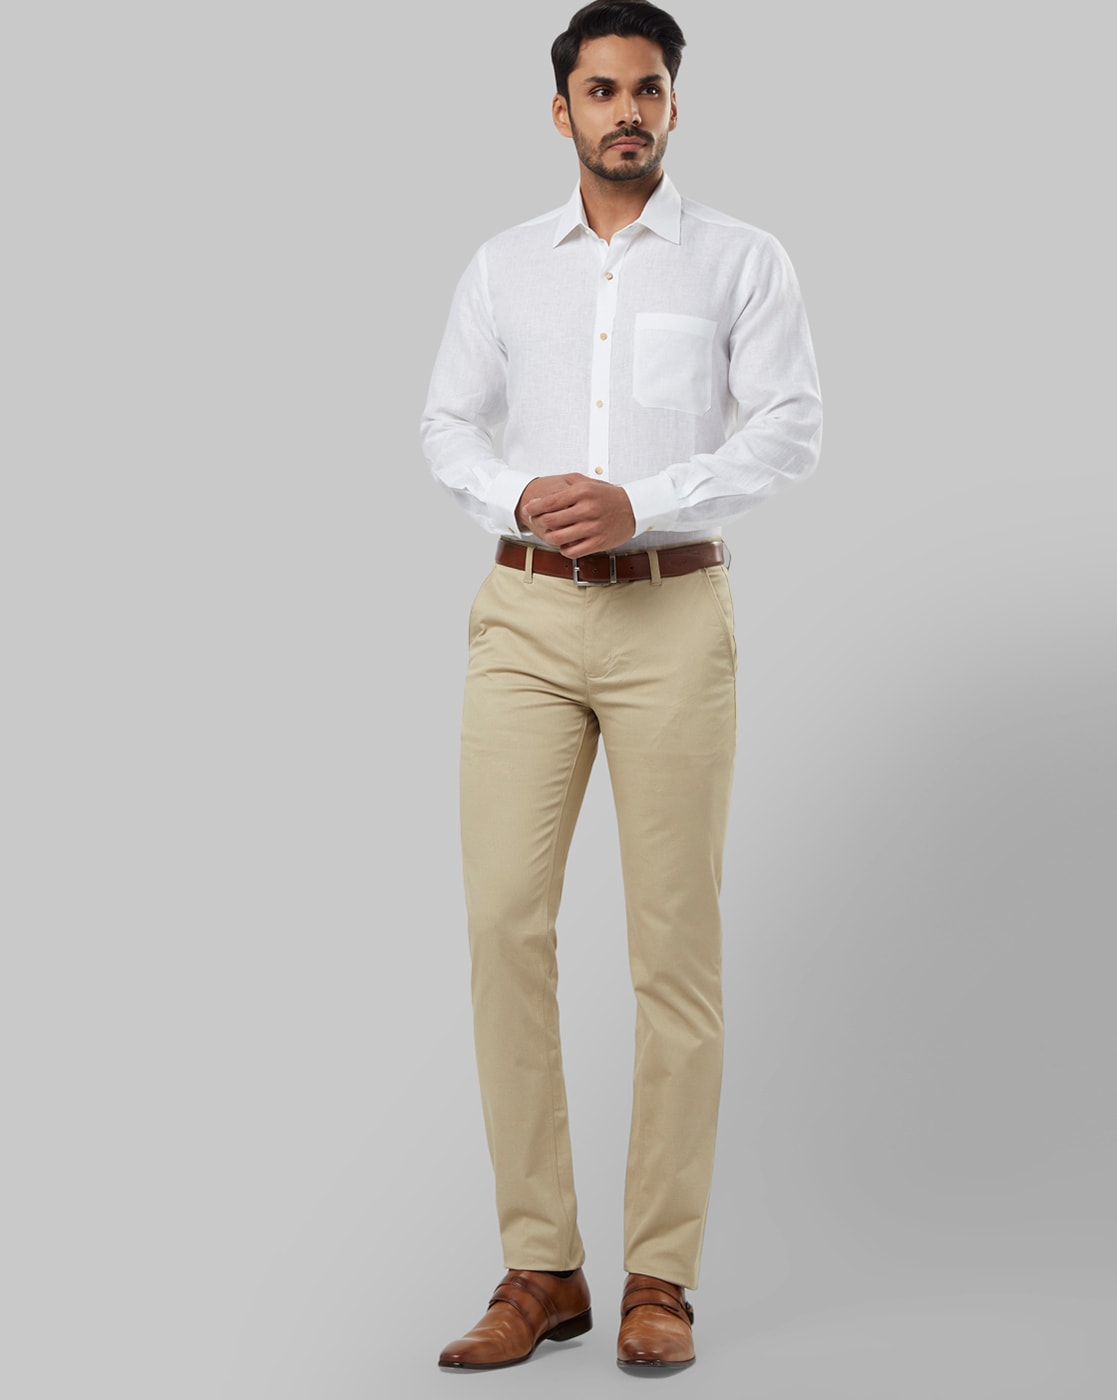 Linen White Shirt with Beige Pants  Hockerty